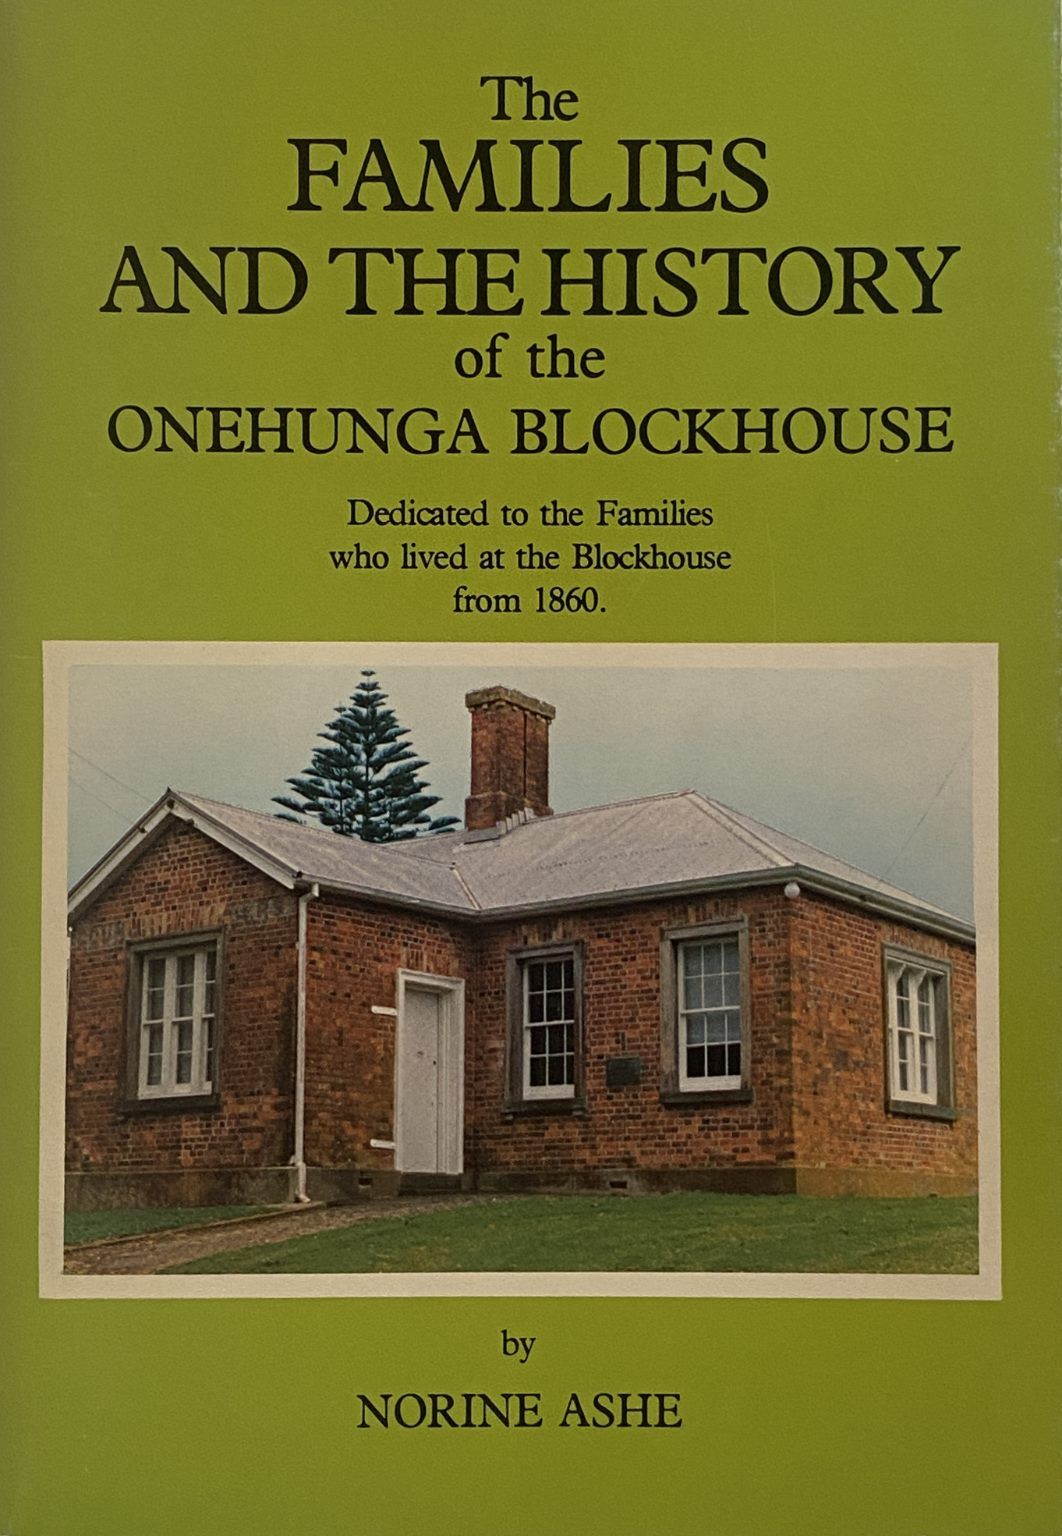 ONEHUNGA BLOCKHOUSE: The Families and History